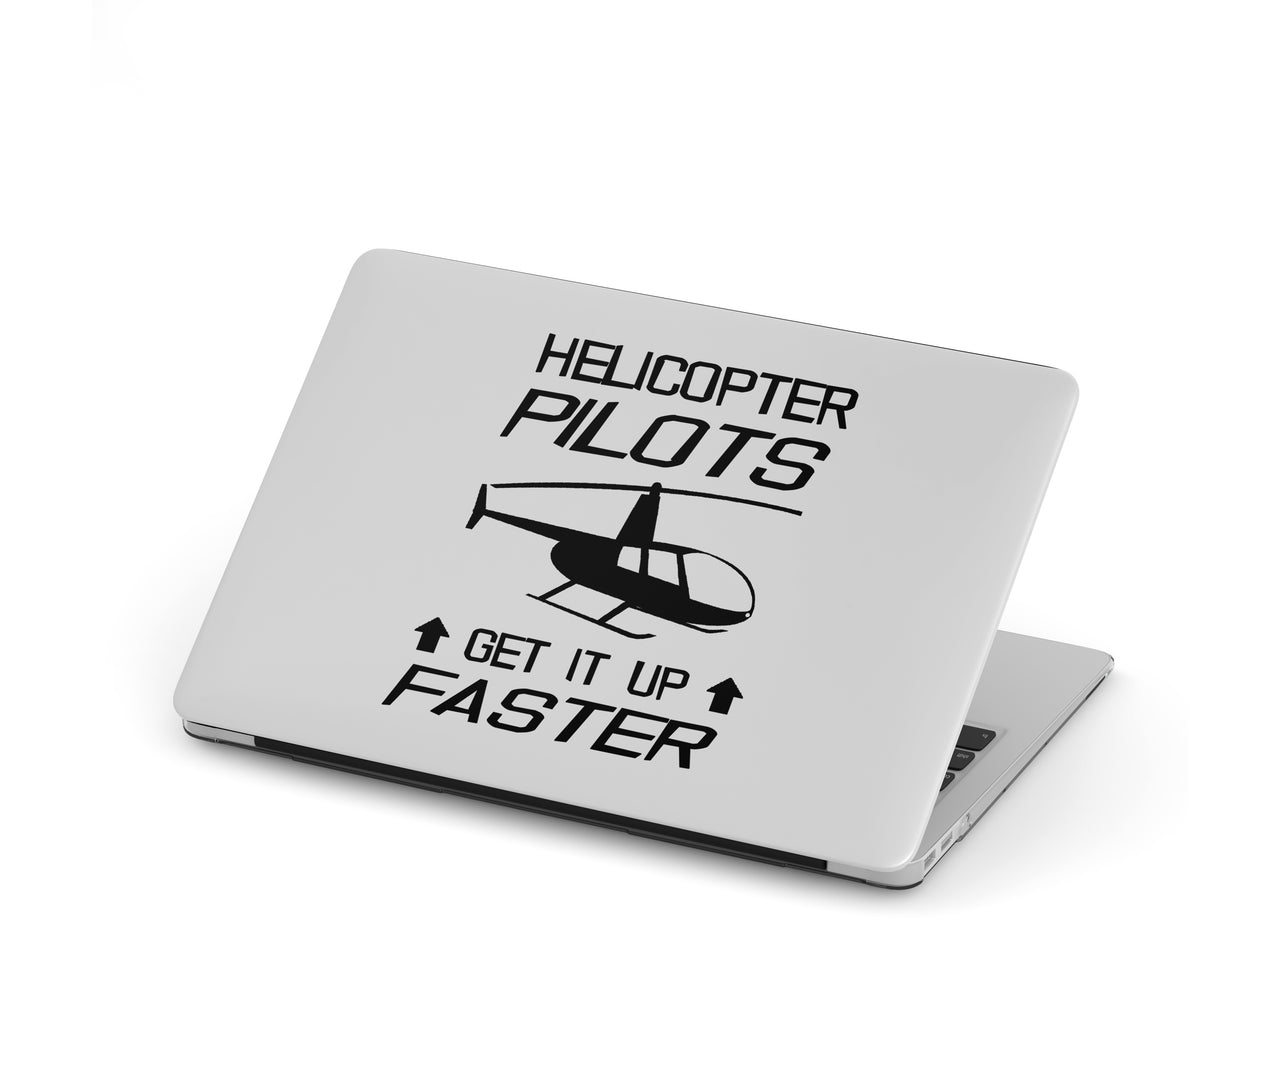 Helicopter Pilots Get It Up Faster Designed Macbook Cases